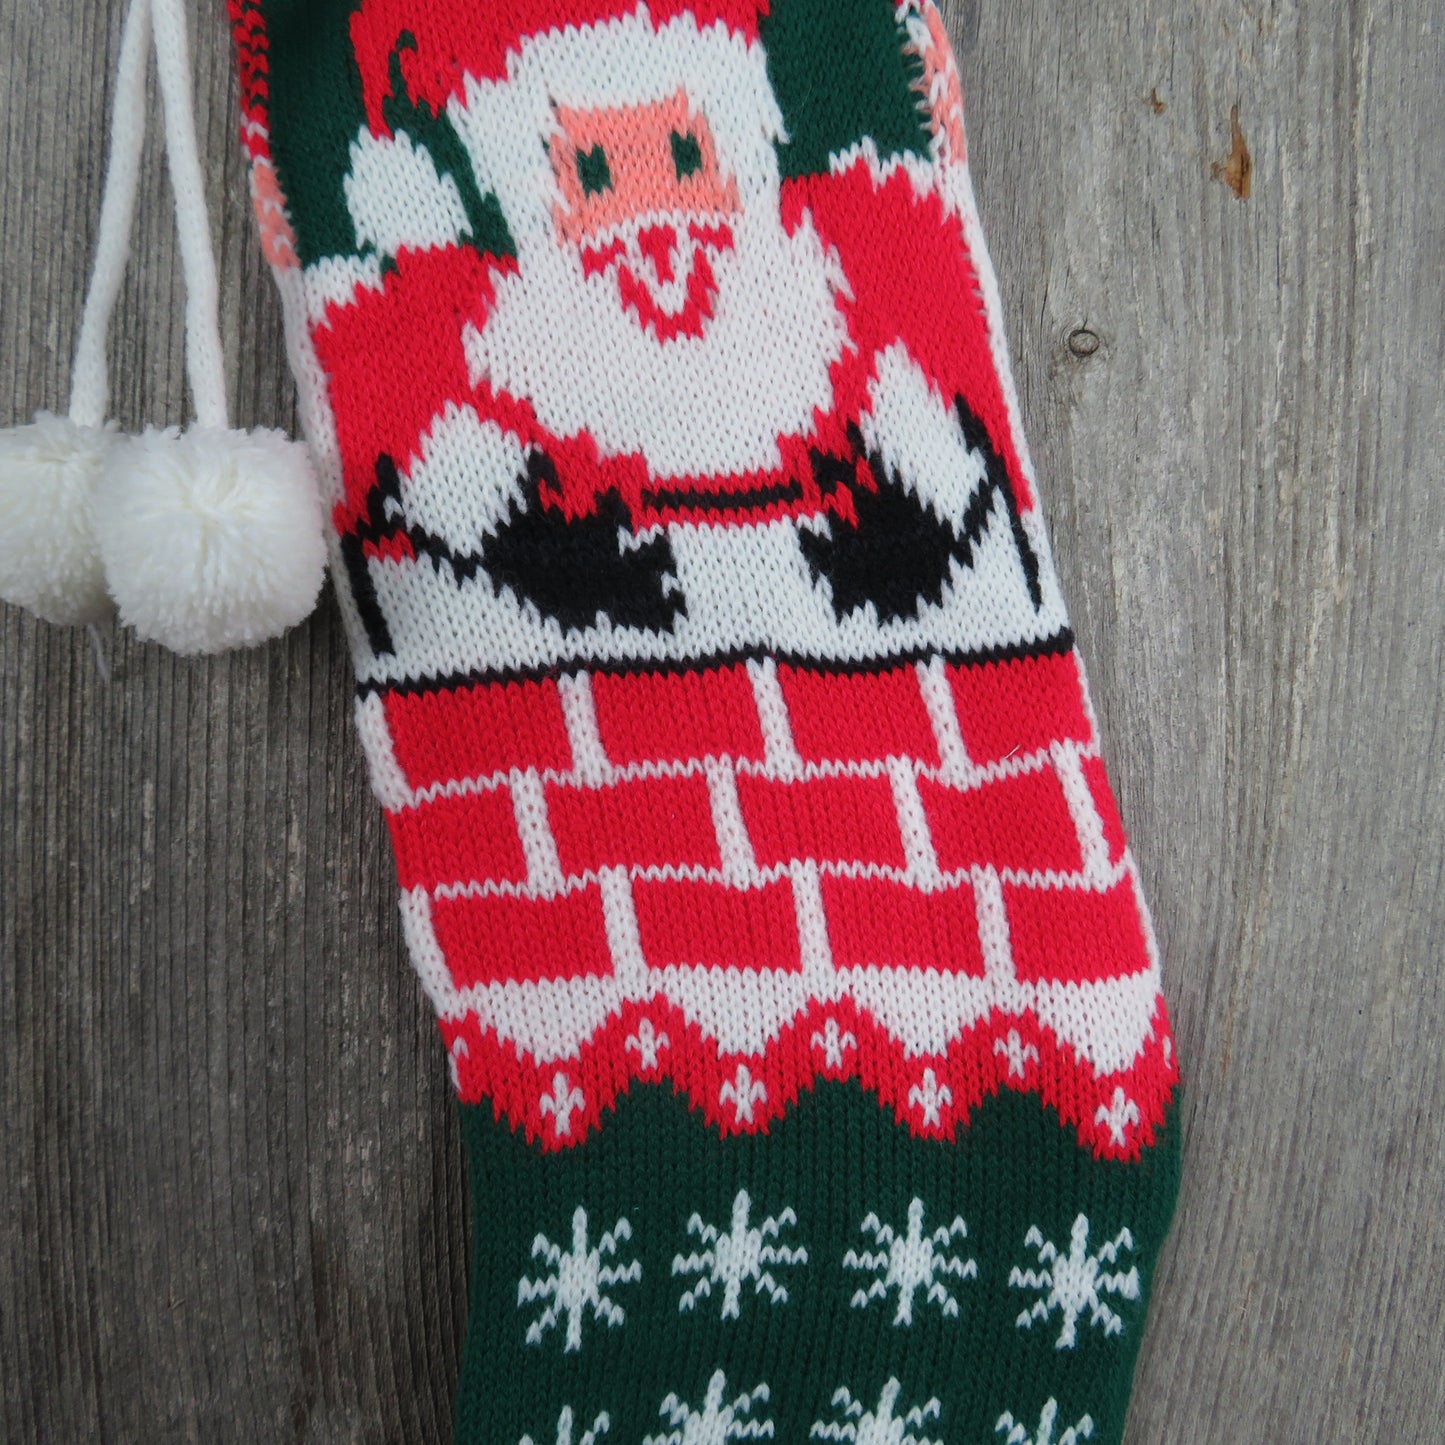 Vintage Santa Claus in Chimney Stocking Knit Christmas Pom Poms Red Green White 1980s - At Grandma's Table